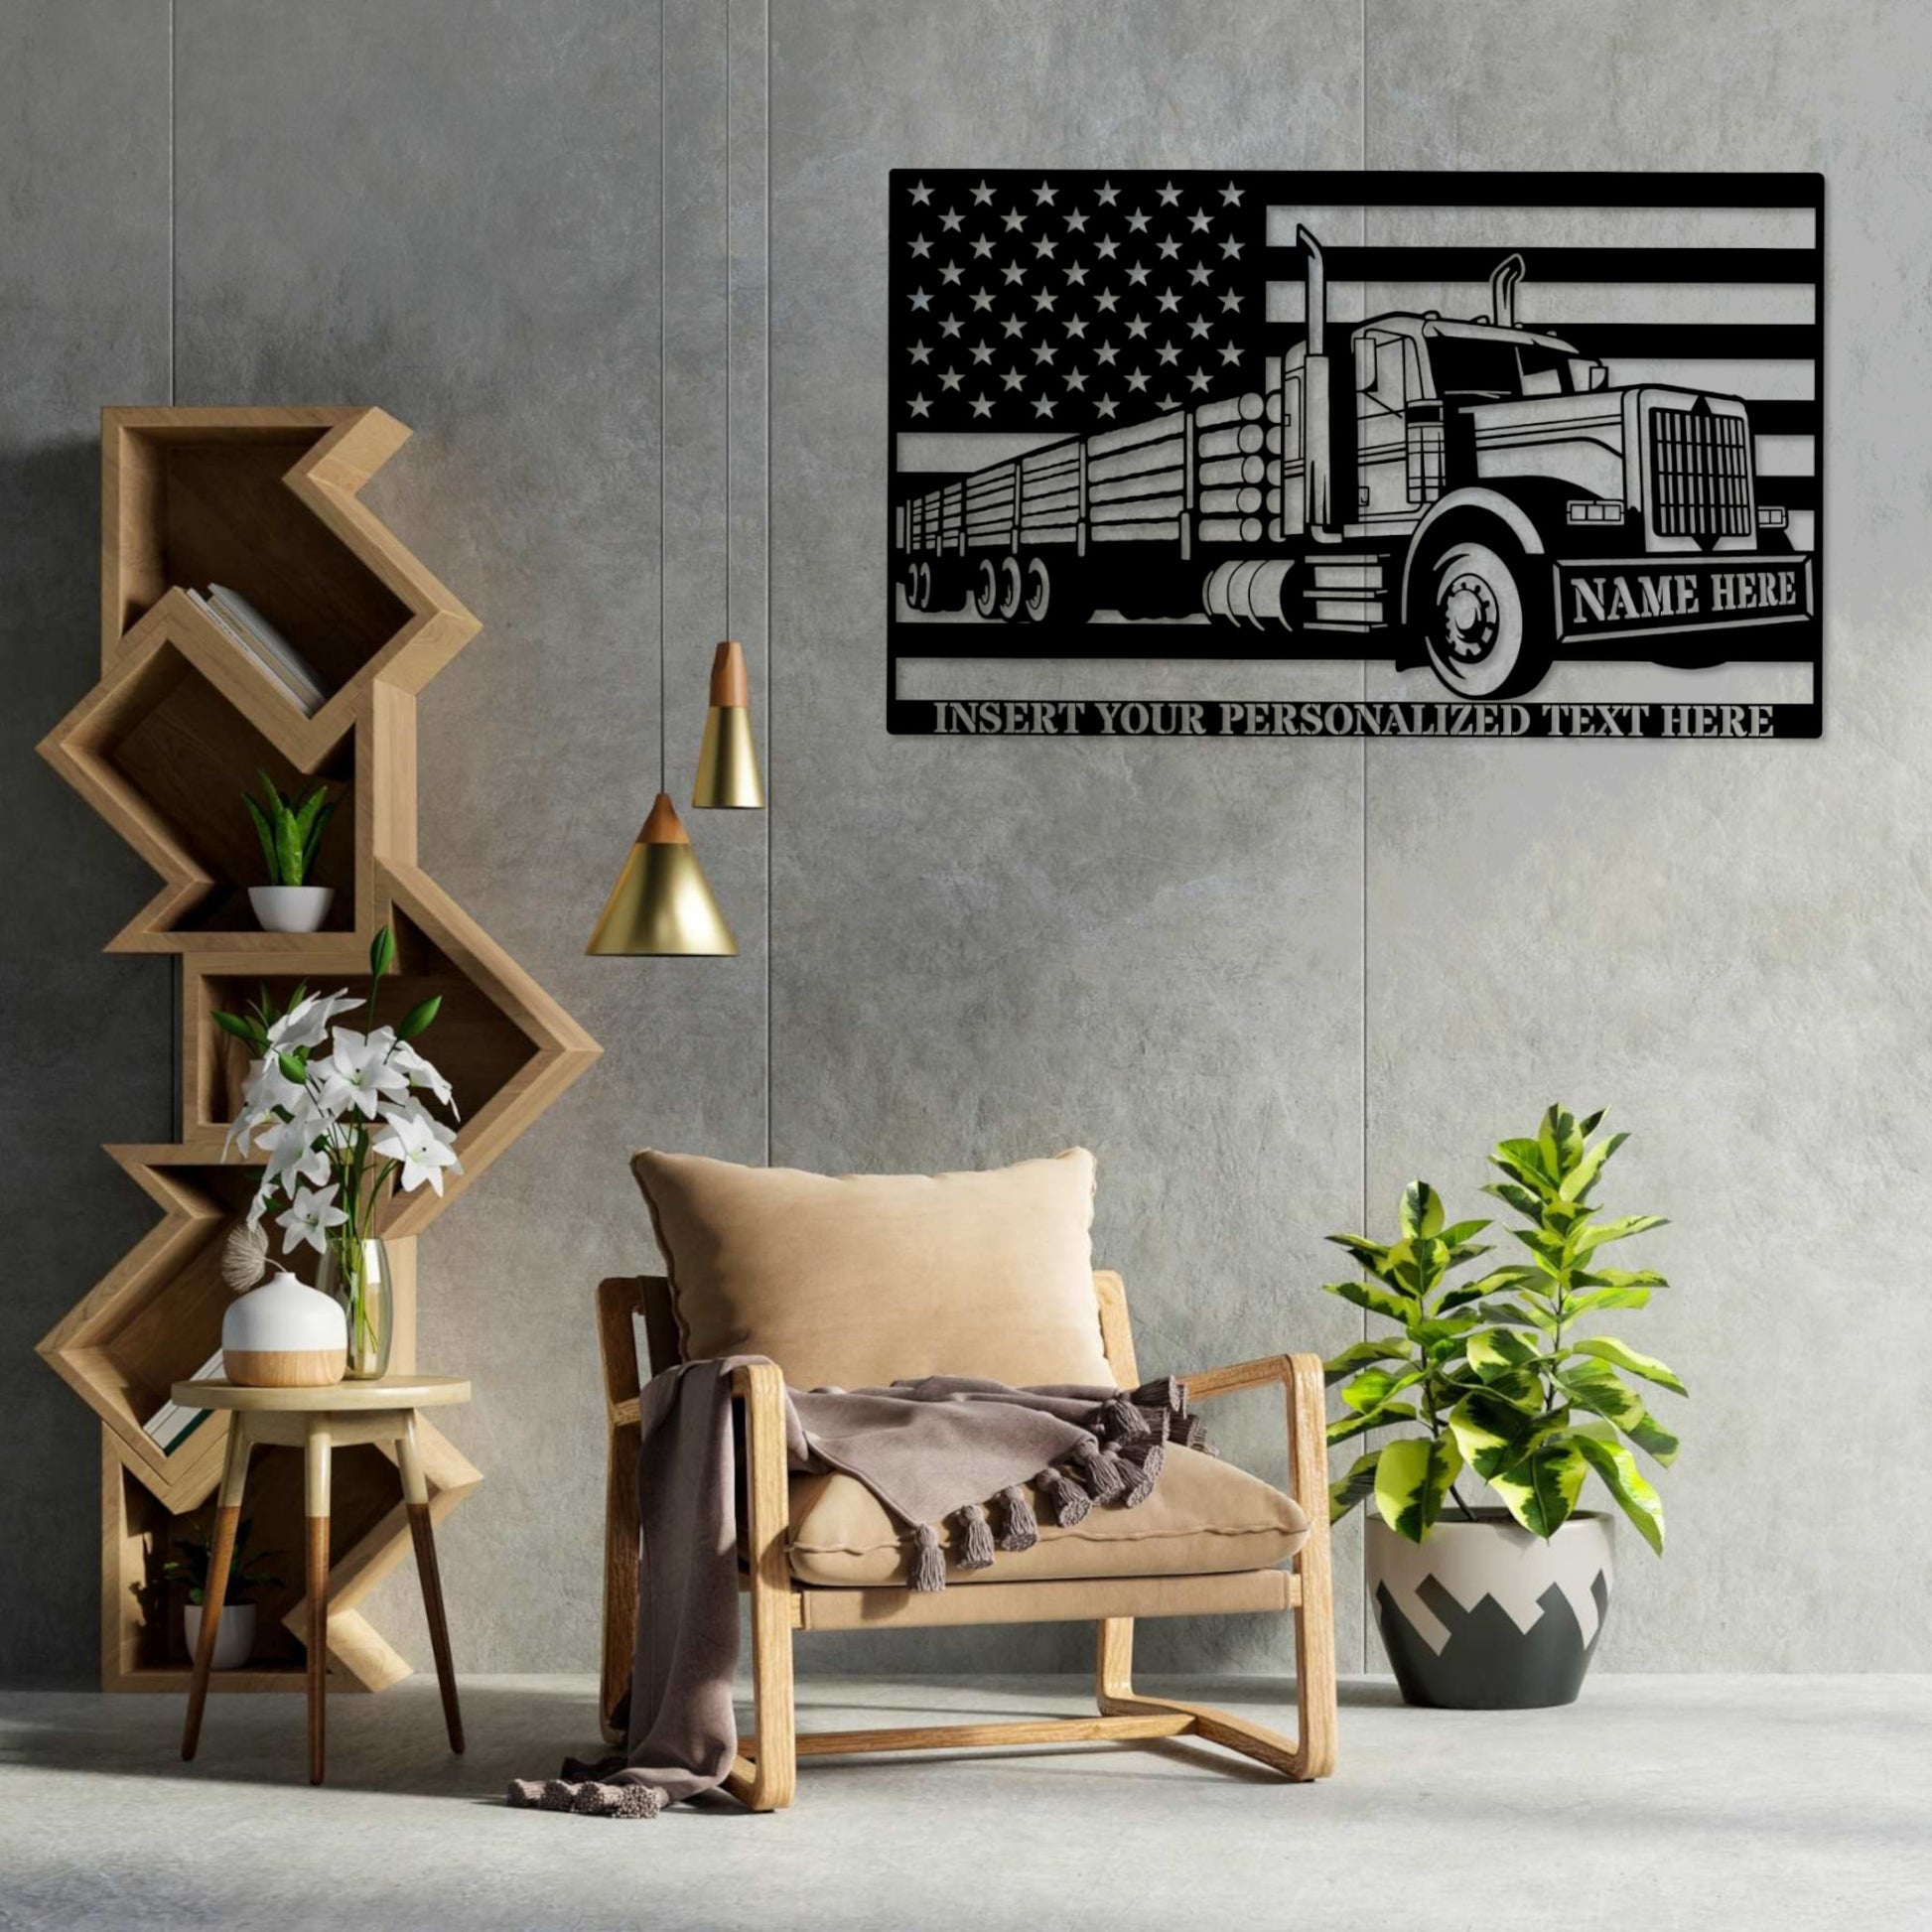 Personalized American Timber Truck Name Metal Sign. Custom US Log Lorry Wall Decor. Patriotic Woodworker Gift. US Logger. Truck Driver Decor